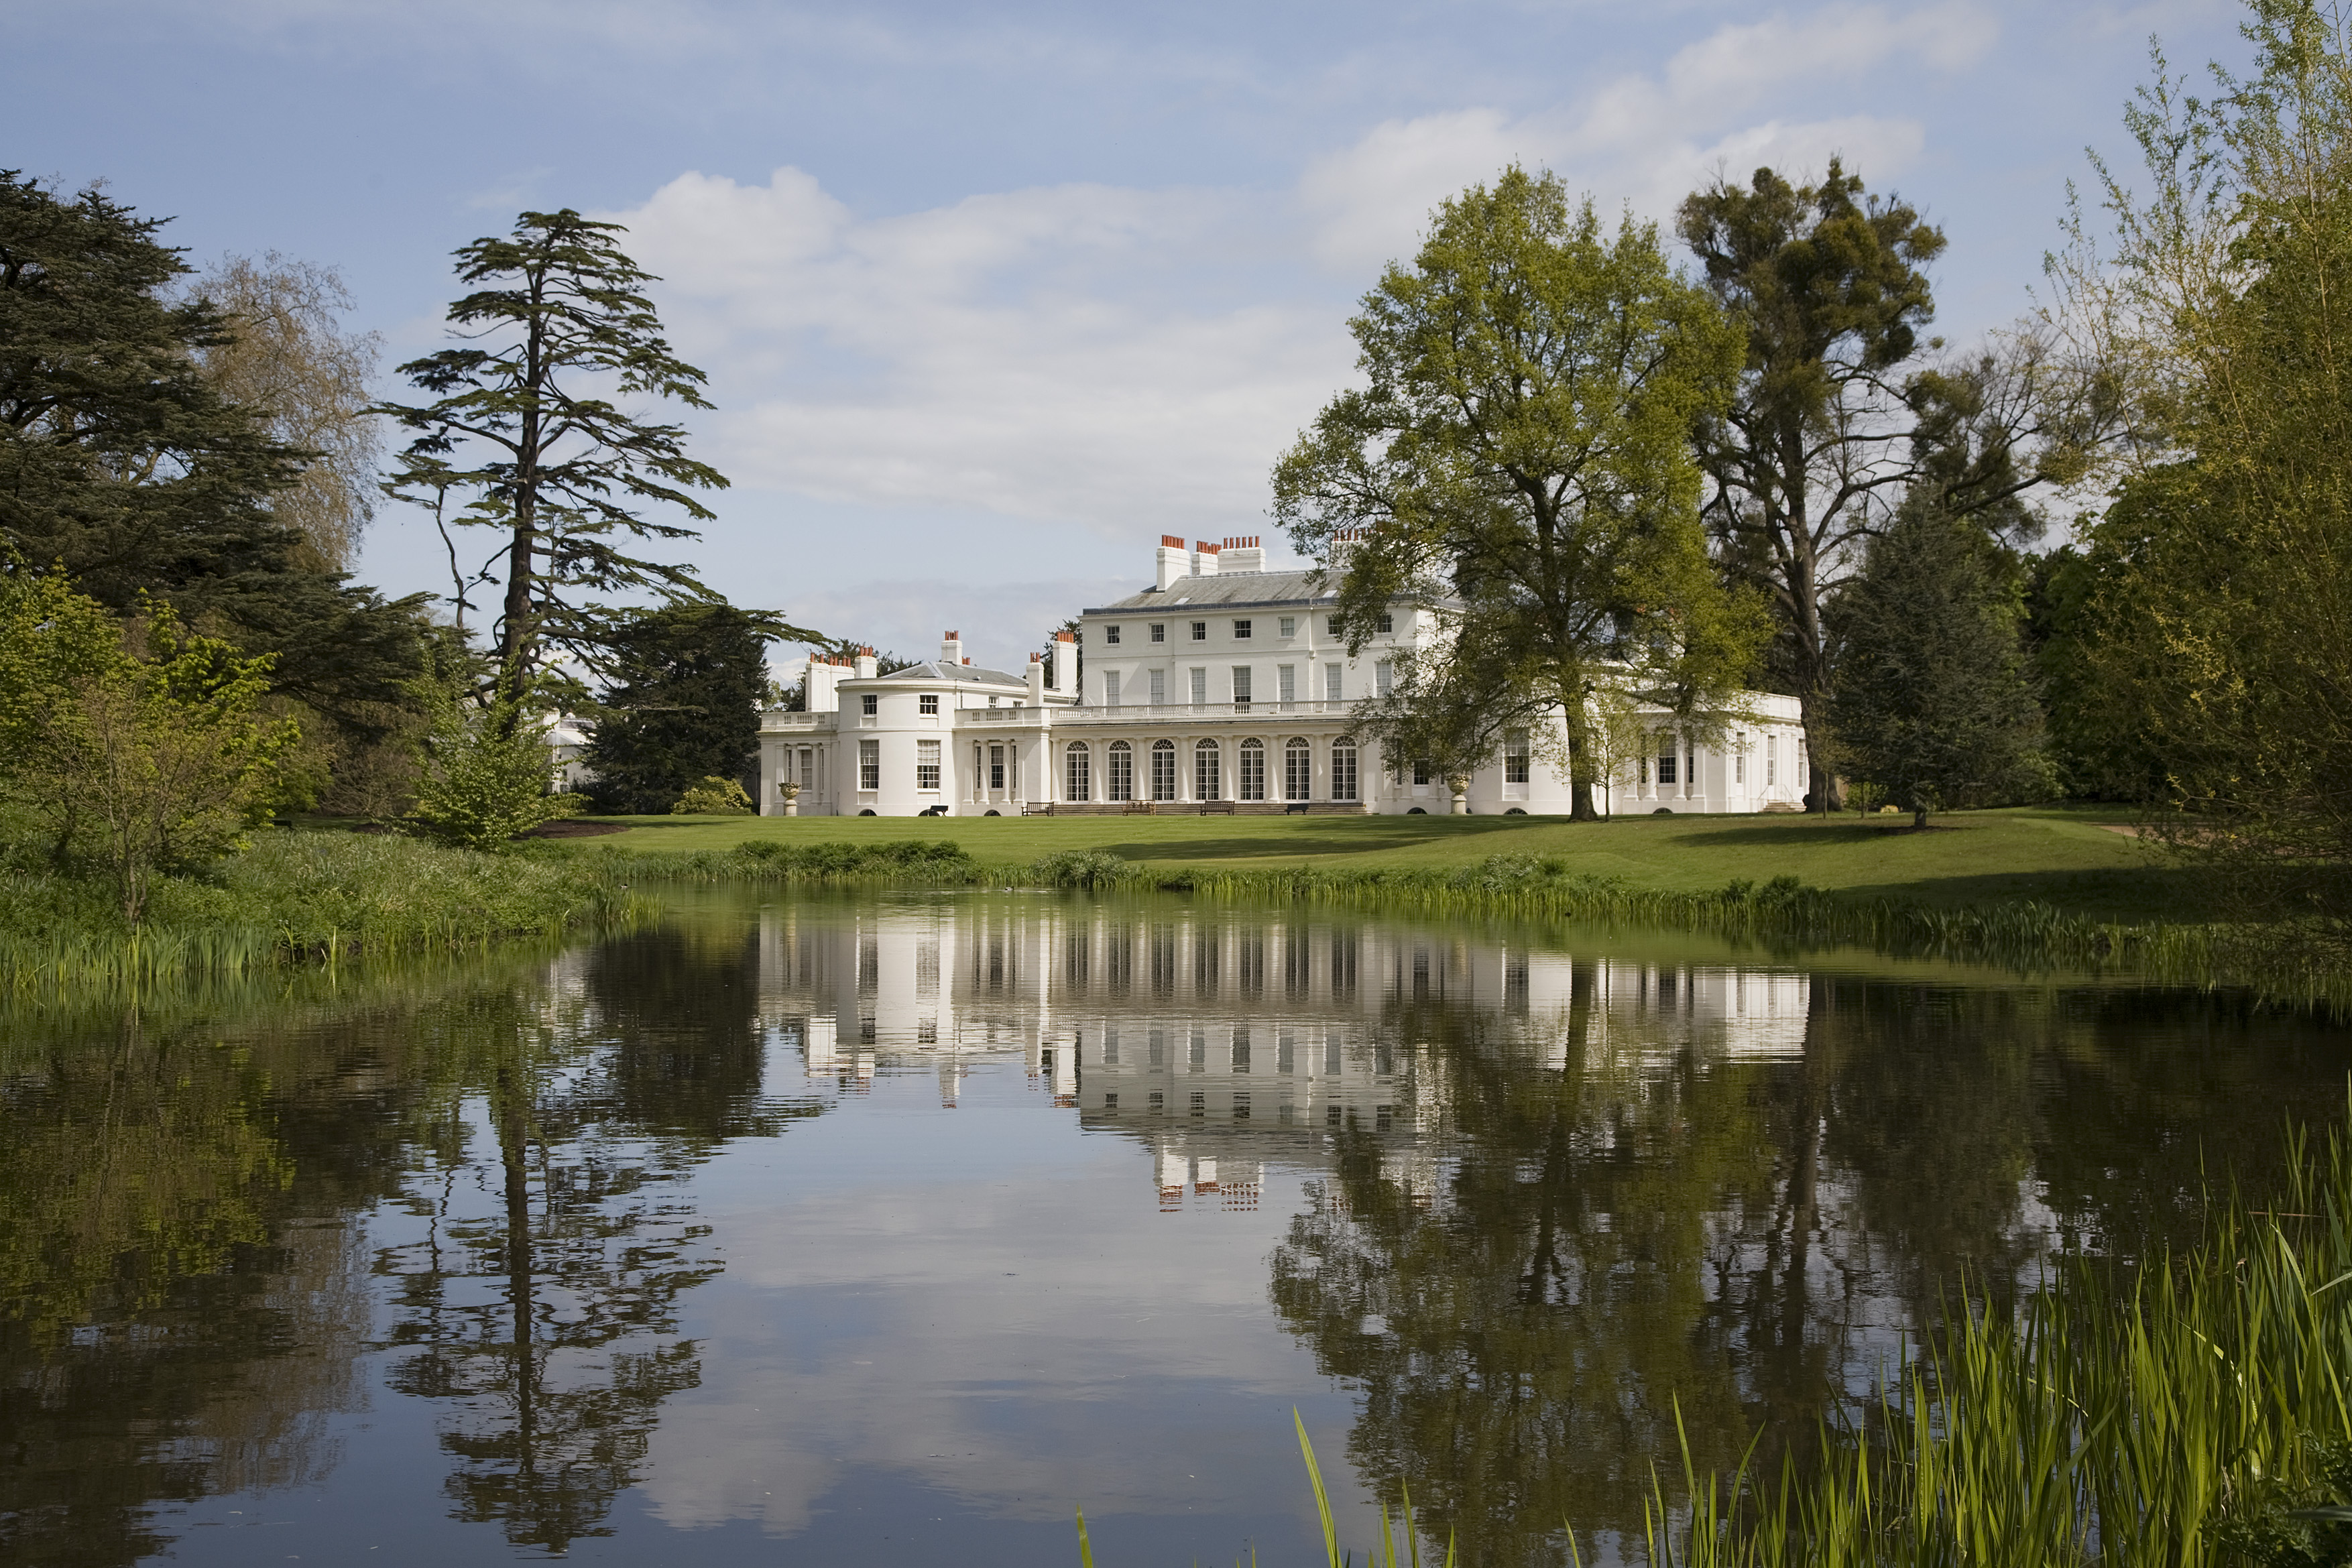 The programme will explore Frogmore House and Gardens.